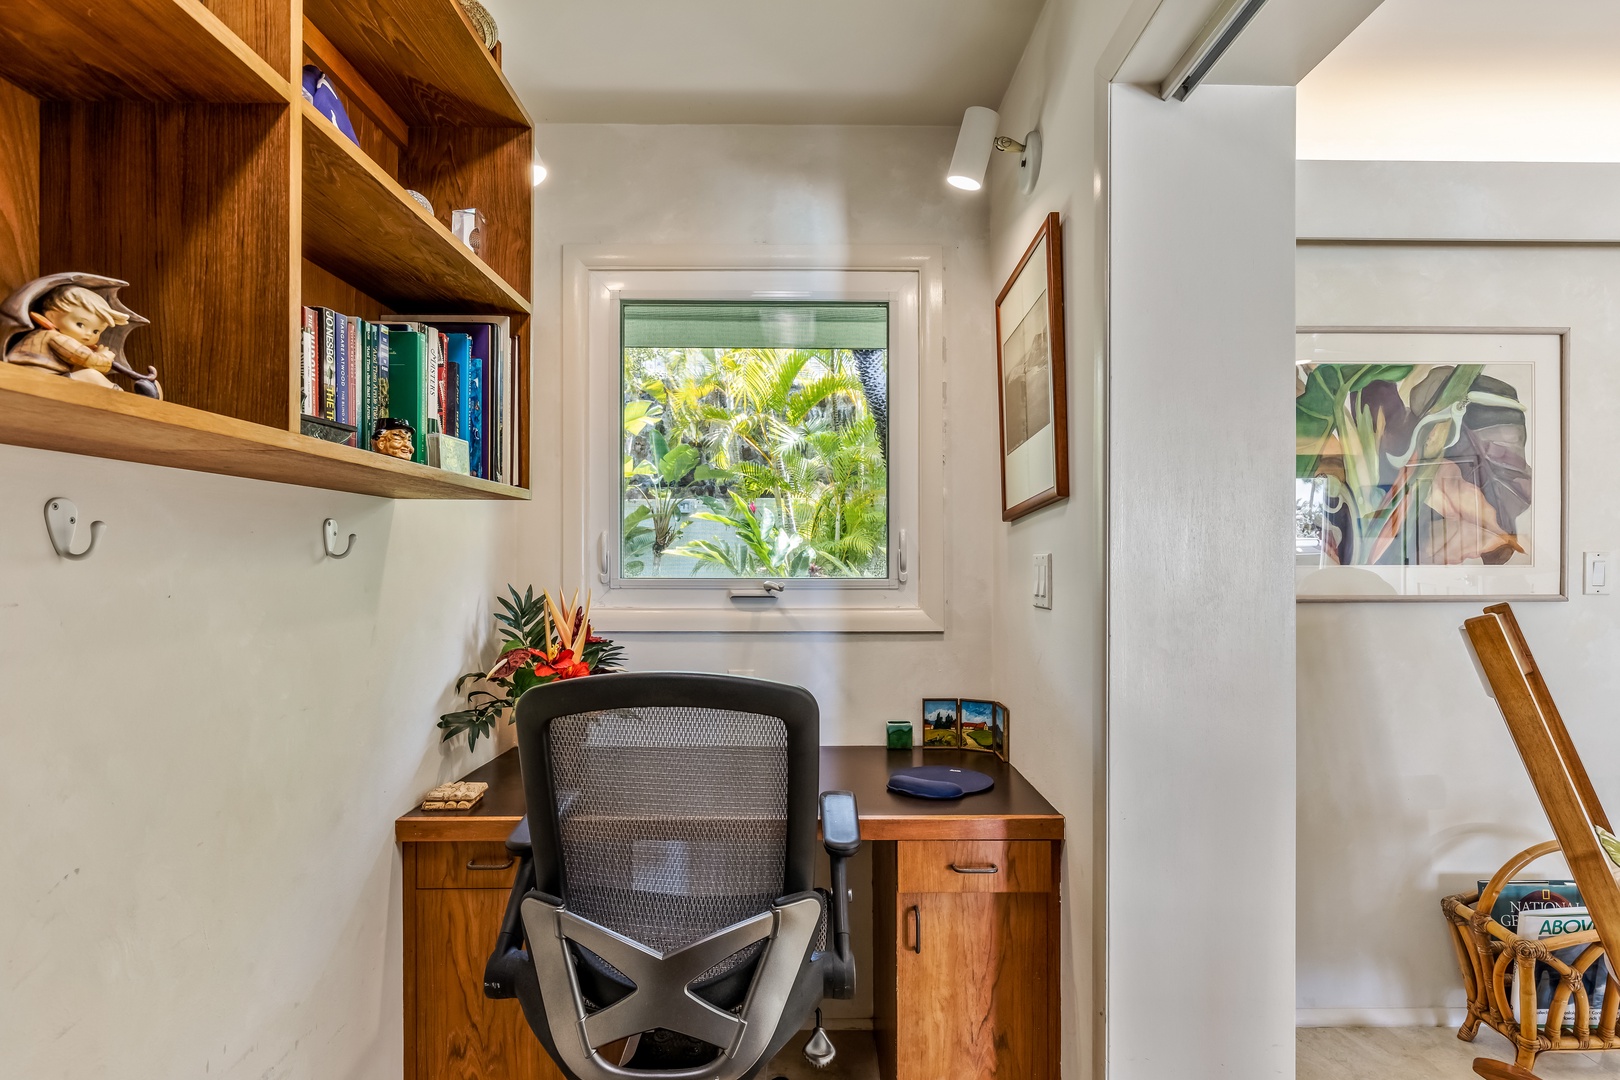 Honolulu Vacation Rentals, Hale Ola - Office space for those who need to get some work done!